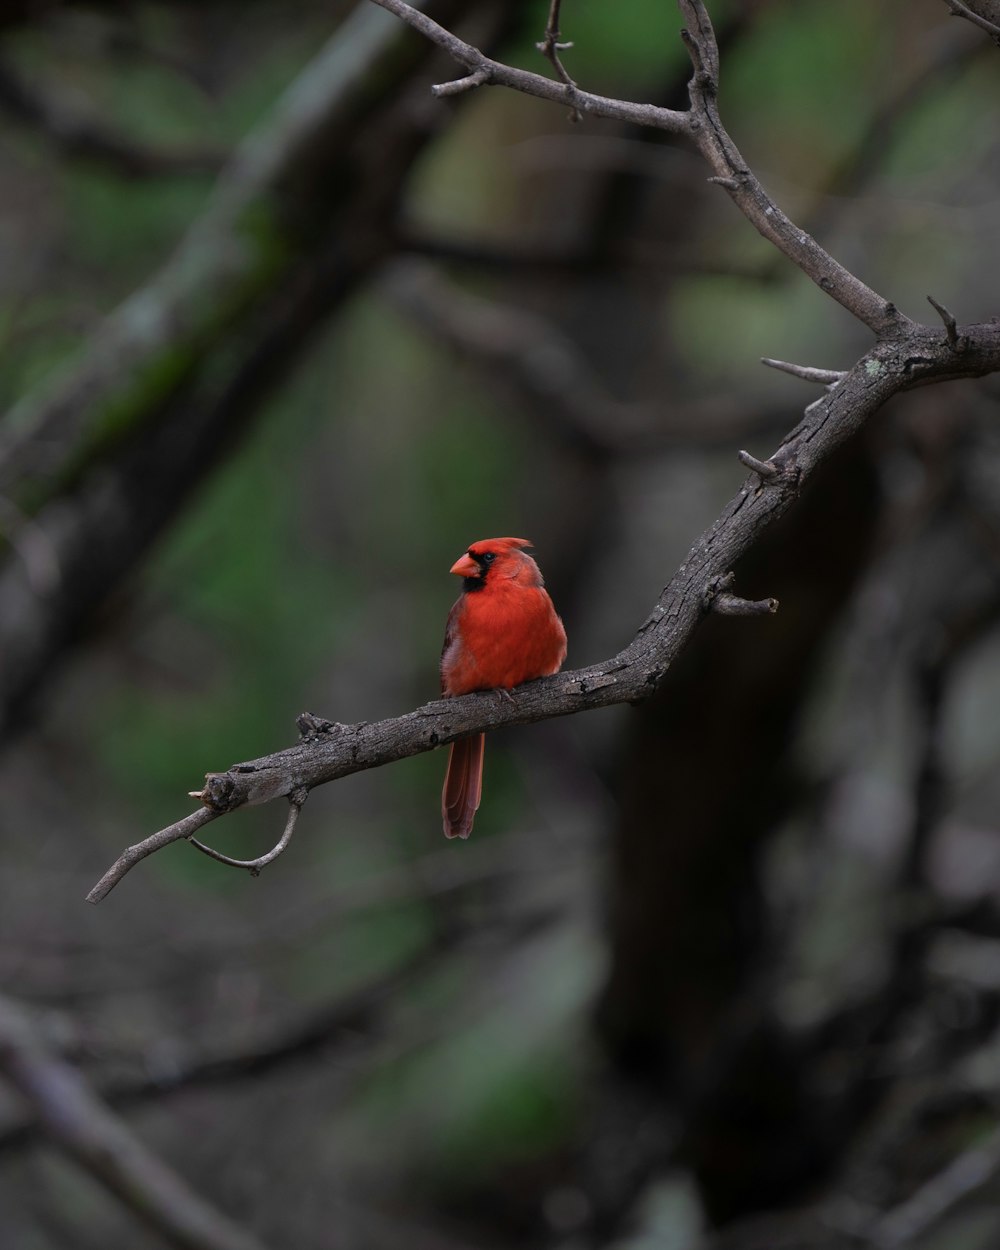 a small red bird perched on a tree branch